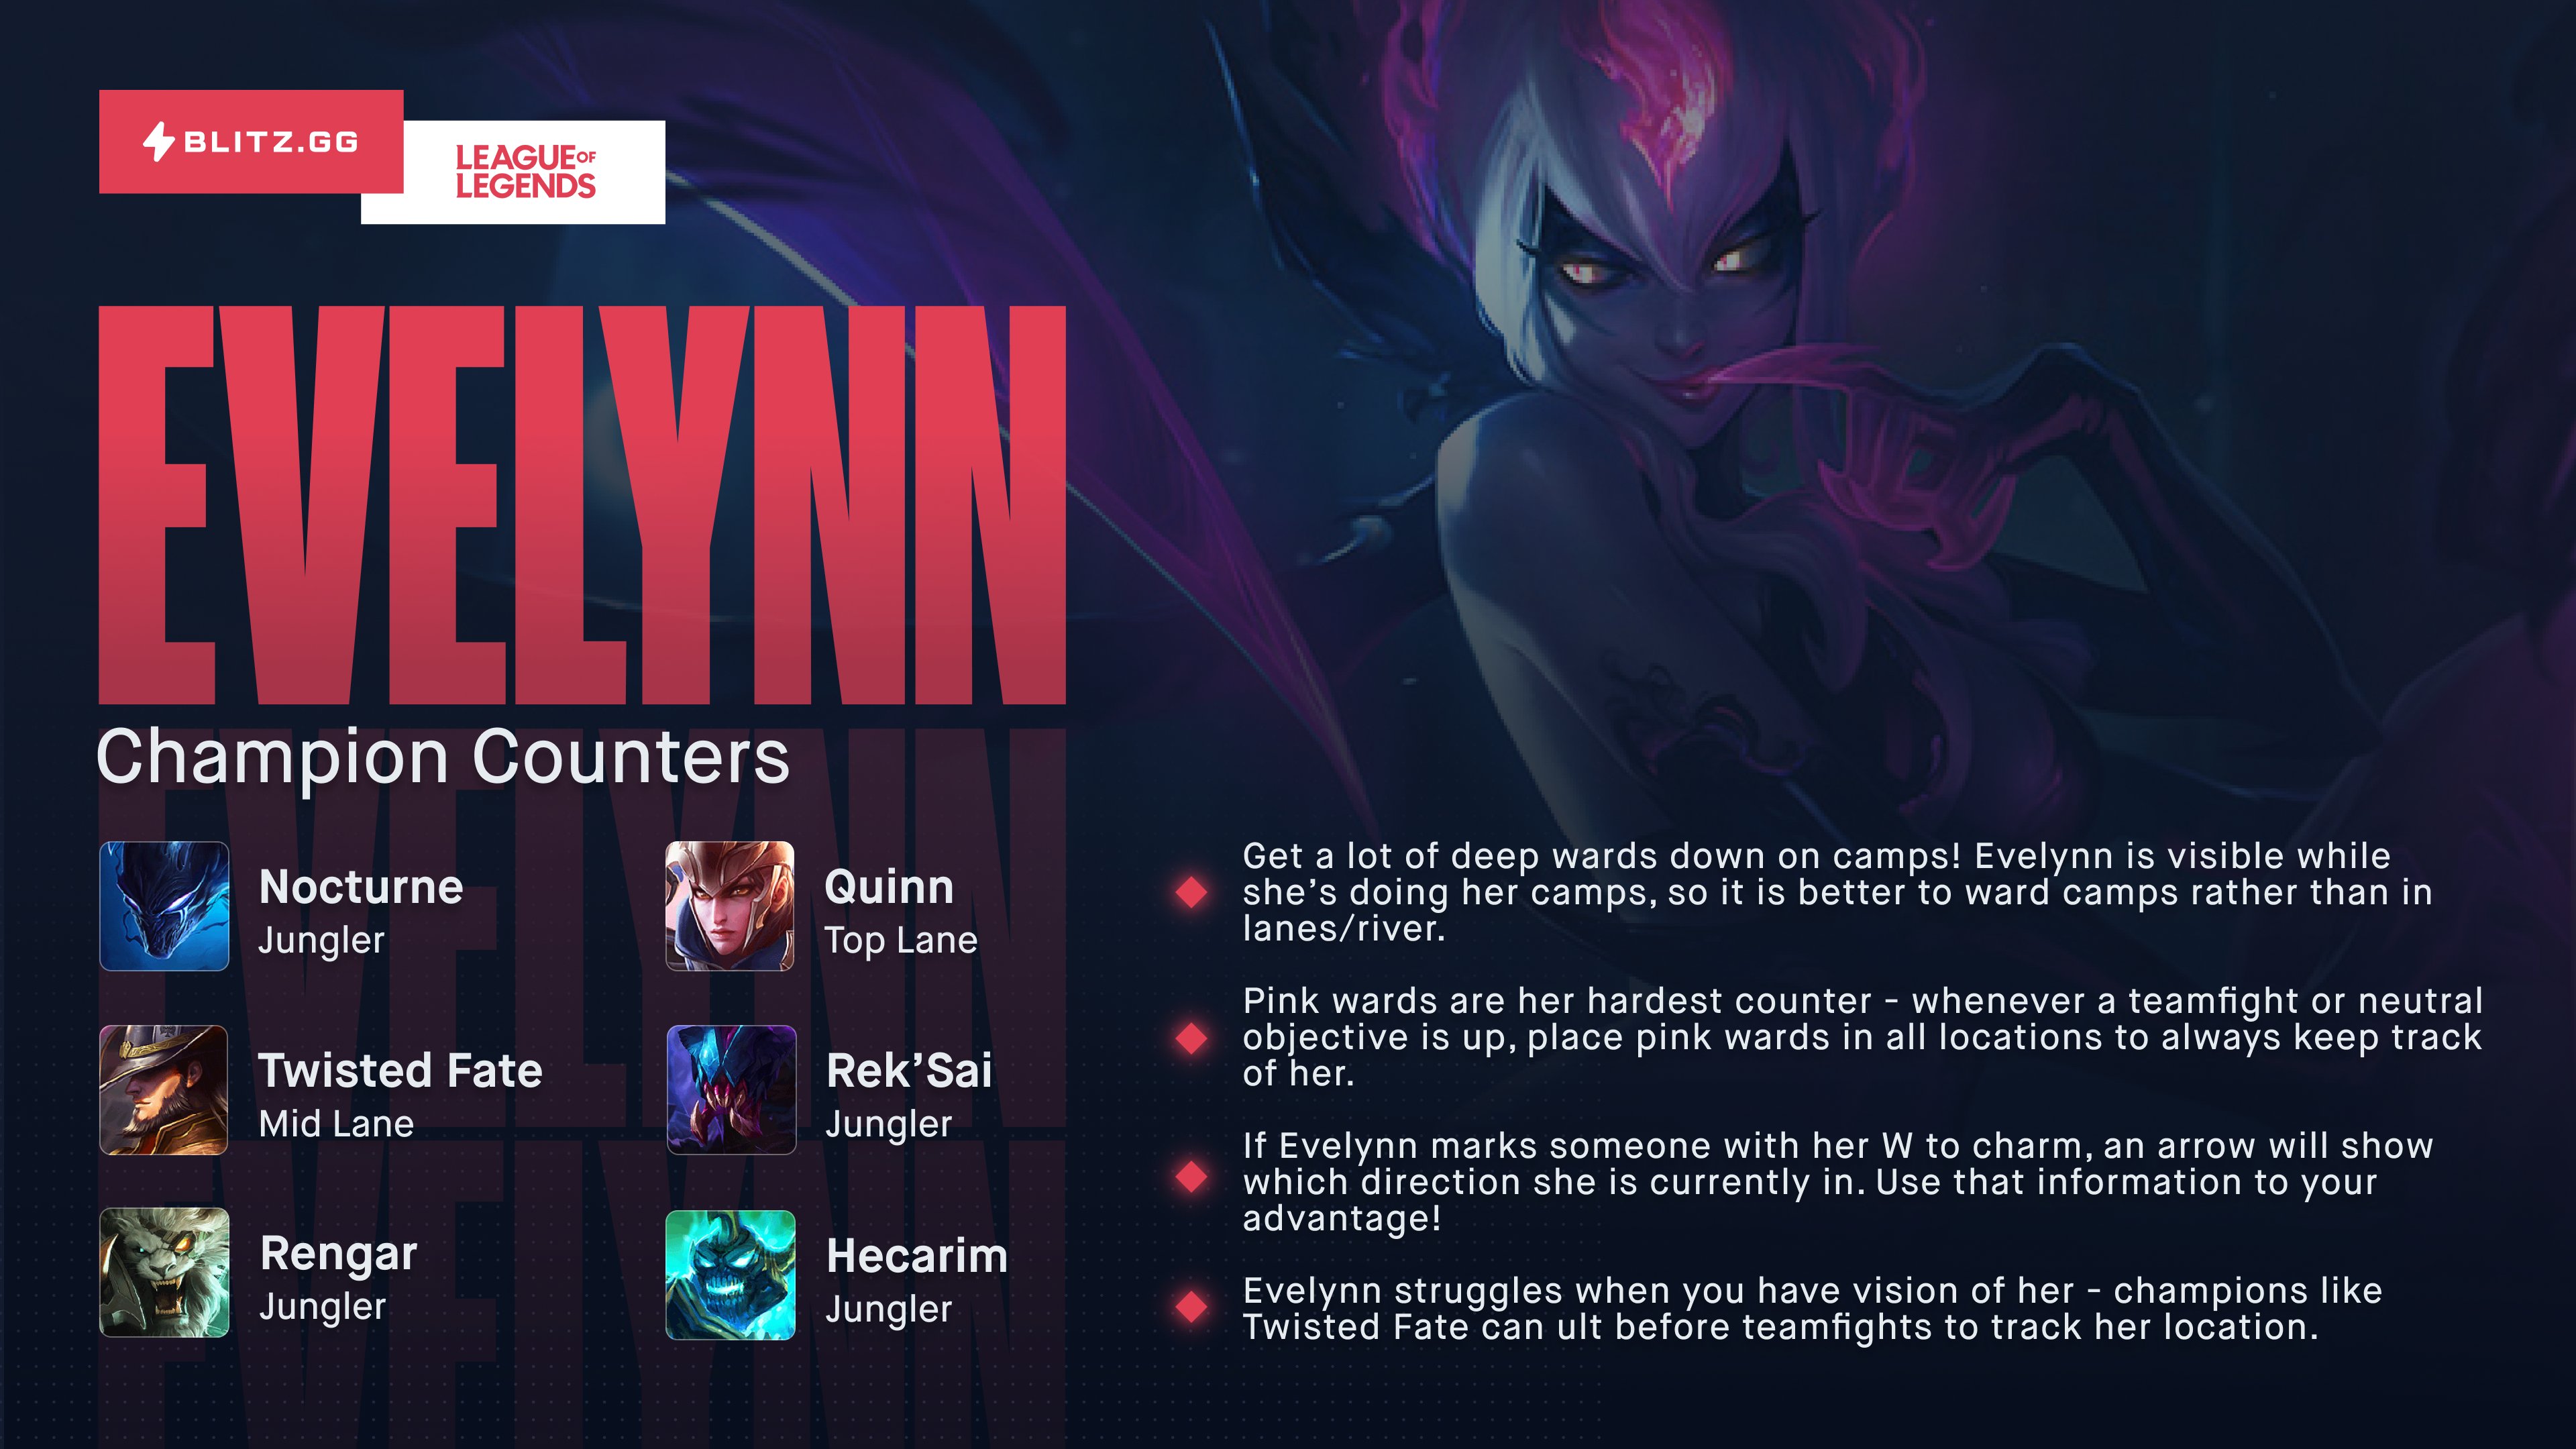 Blitz App Twitterissä: "Evelynn's biggest asset is that she can go invisible. So how do you counter someone you can't Here's how to play against her ⤵️ https://t.co/RRUvsBD5qn" / Twitter